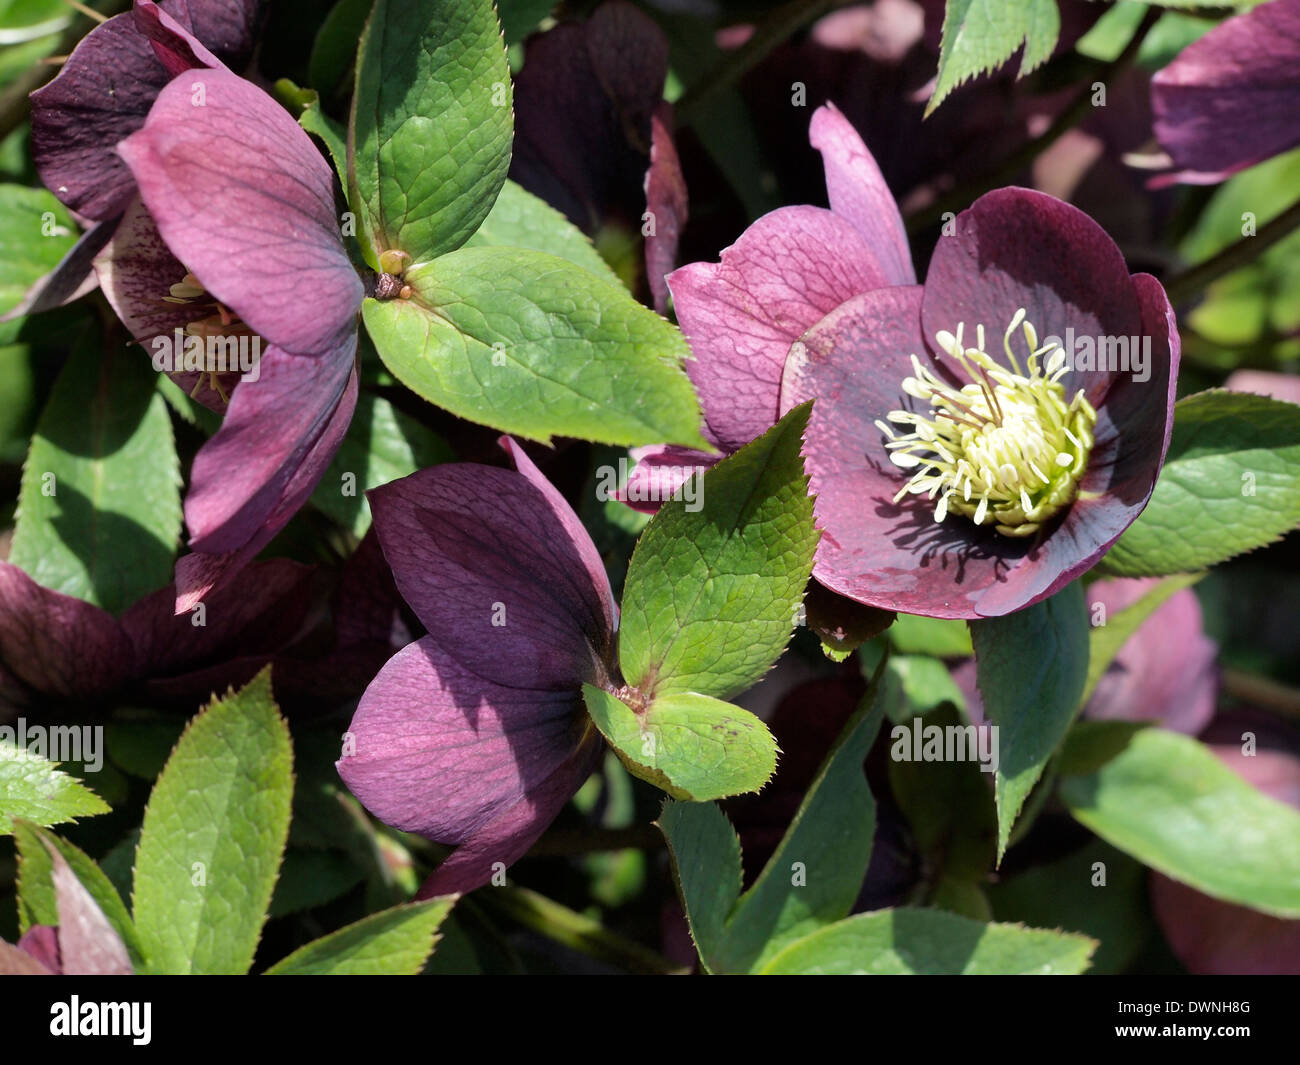 Hellebore 'Hillier Hybrid' showing detail of the leaves and flowers. Stock Photo